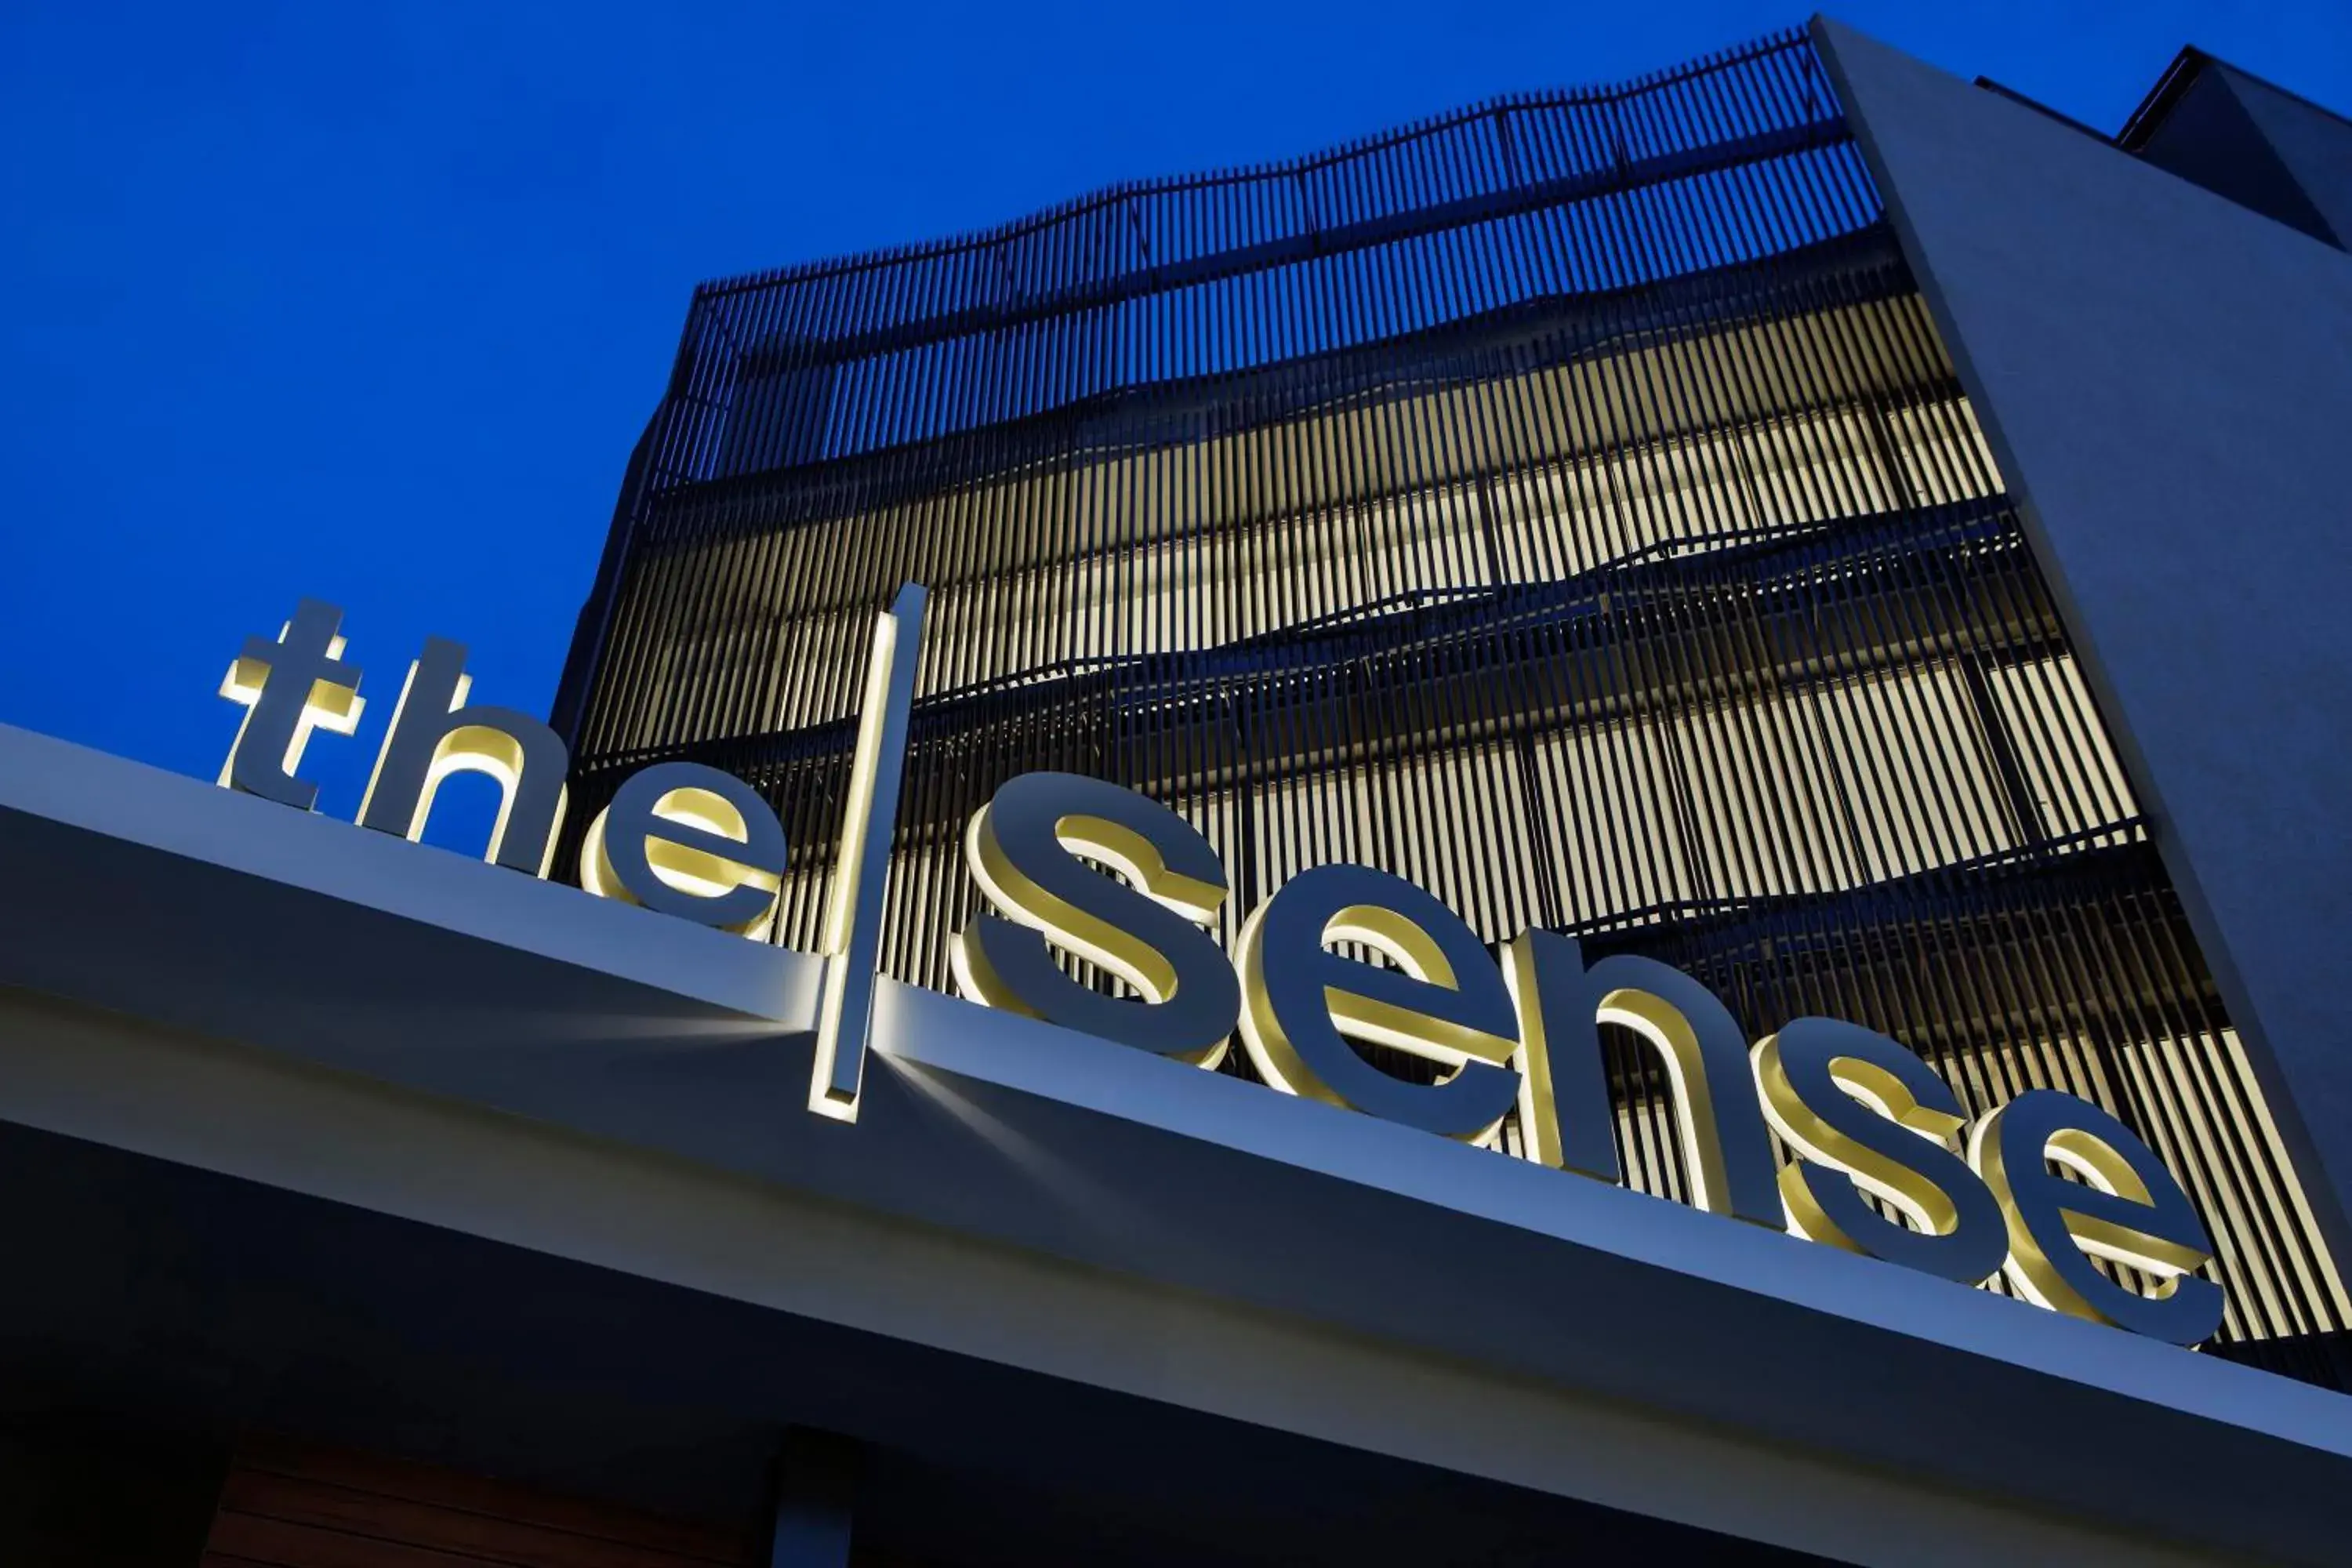 Text overlay, Property Logo/Sign in The Sense Deluxe Hotel